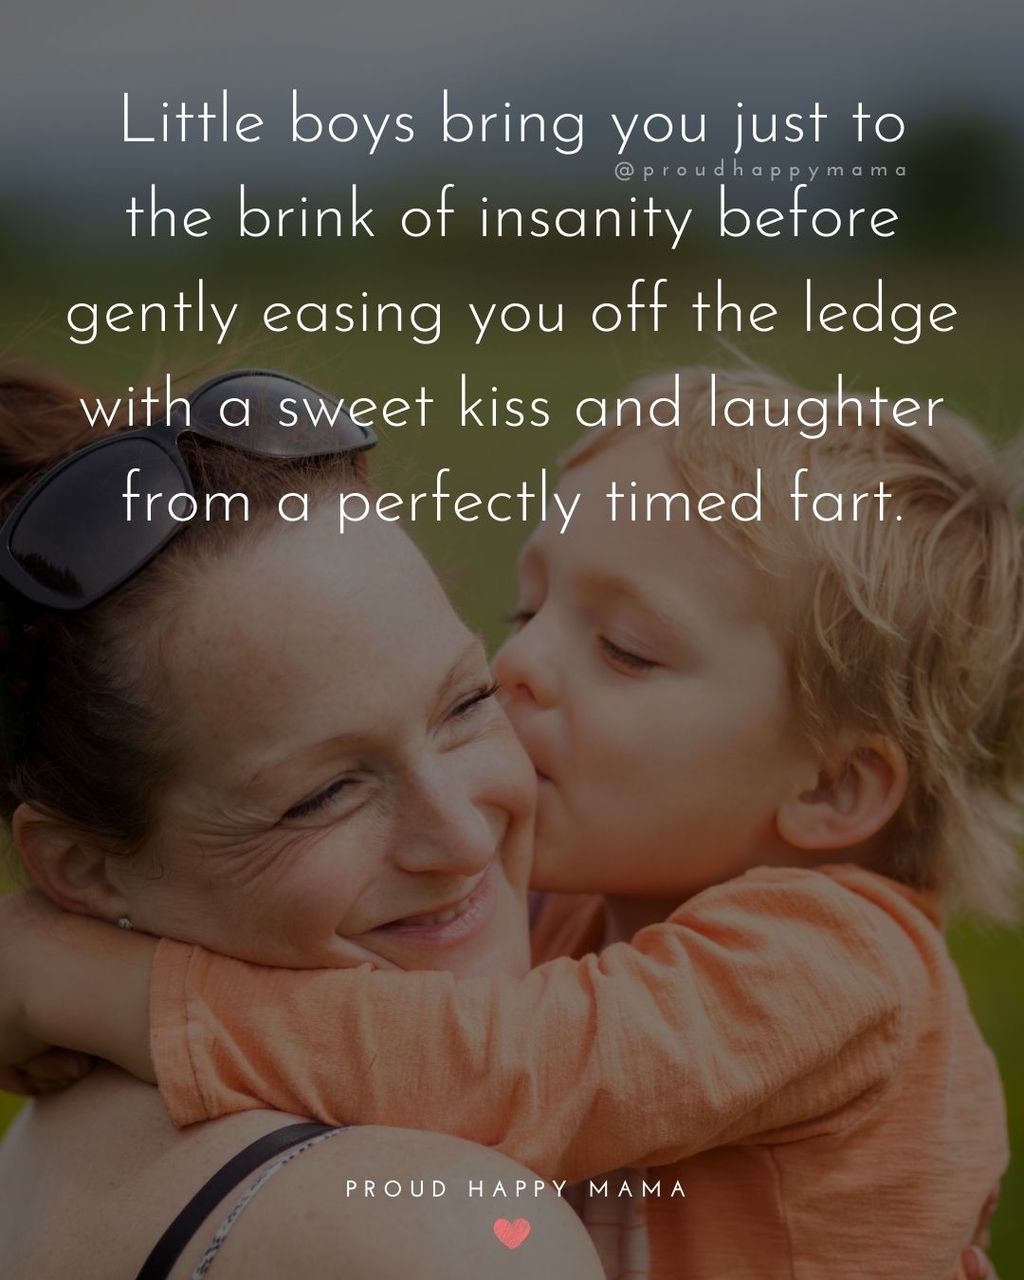 Boy Mom Quotes - Little boys bring you just to the brink of insanity before gently easing you off the ledge with a sweet kiss and laughter from a perfectly timed fart.